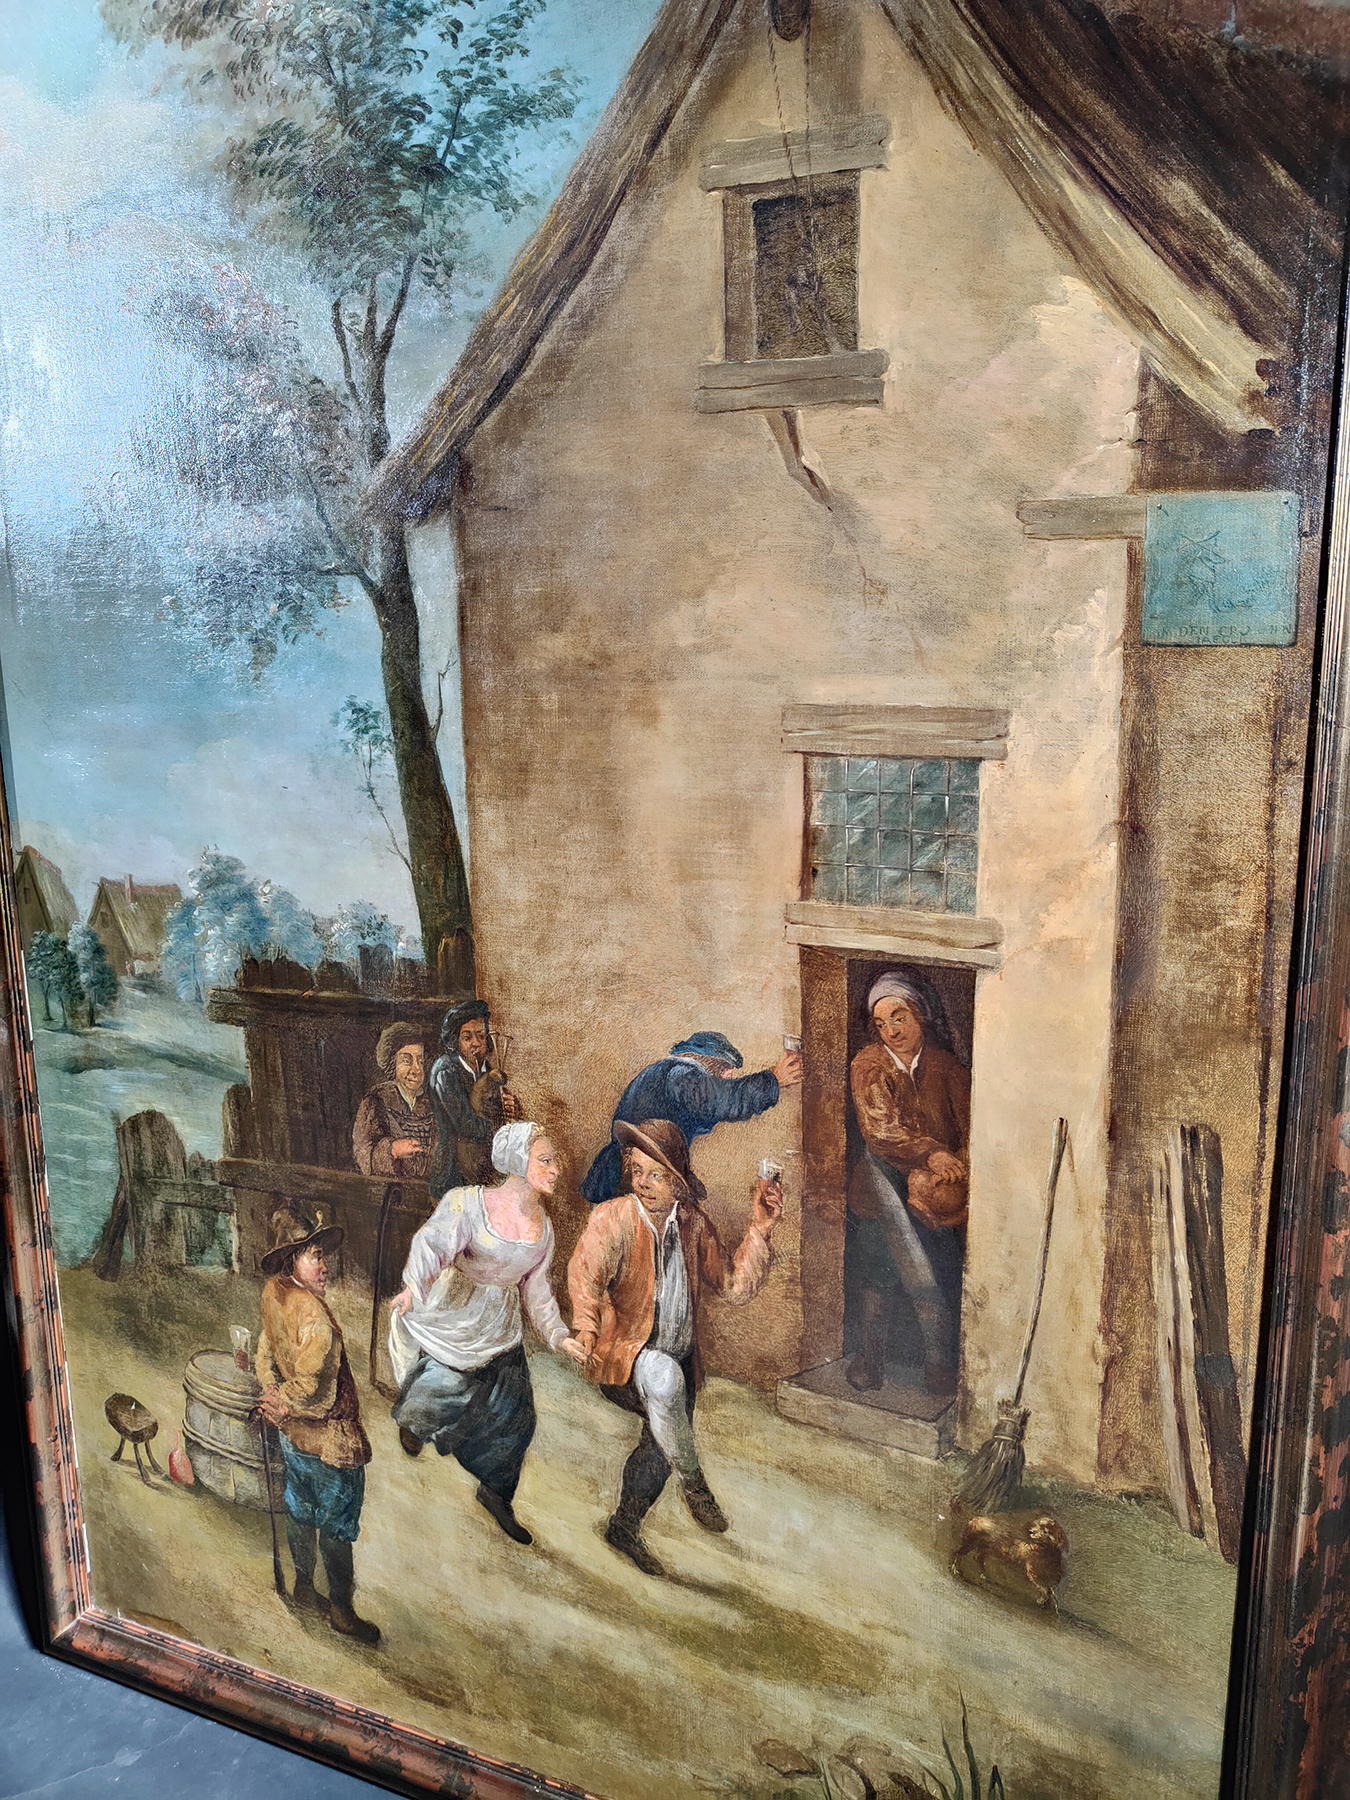 Country Scene, Large Oil On Canvas, Flemish School, 17th century - Image 5 of 7